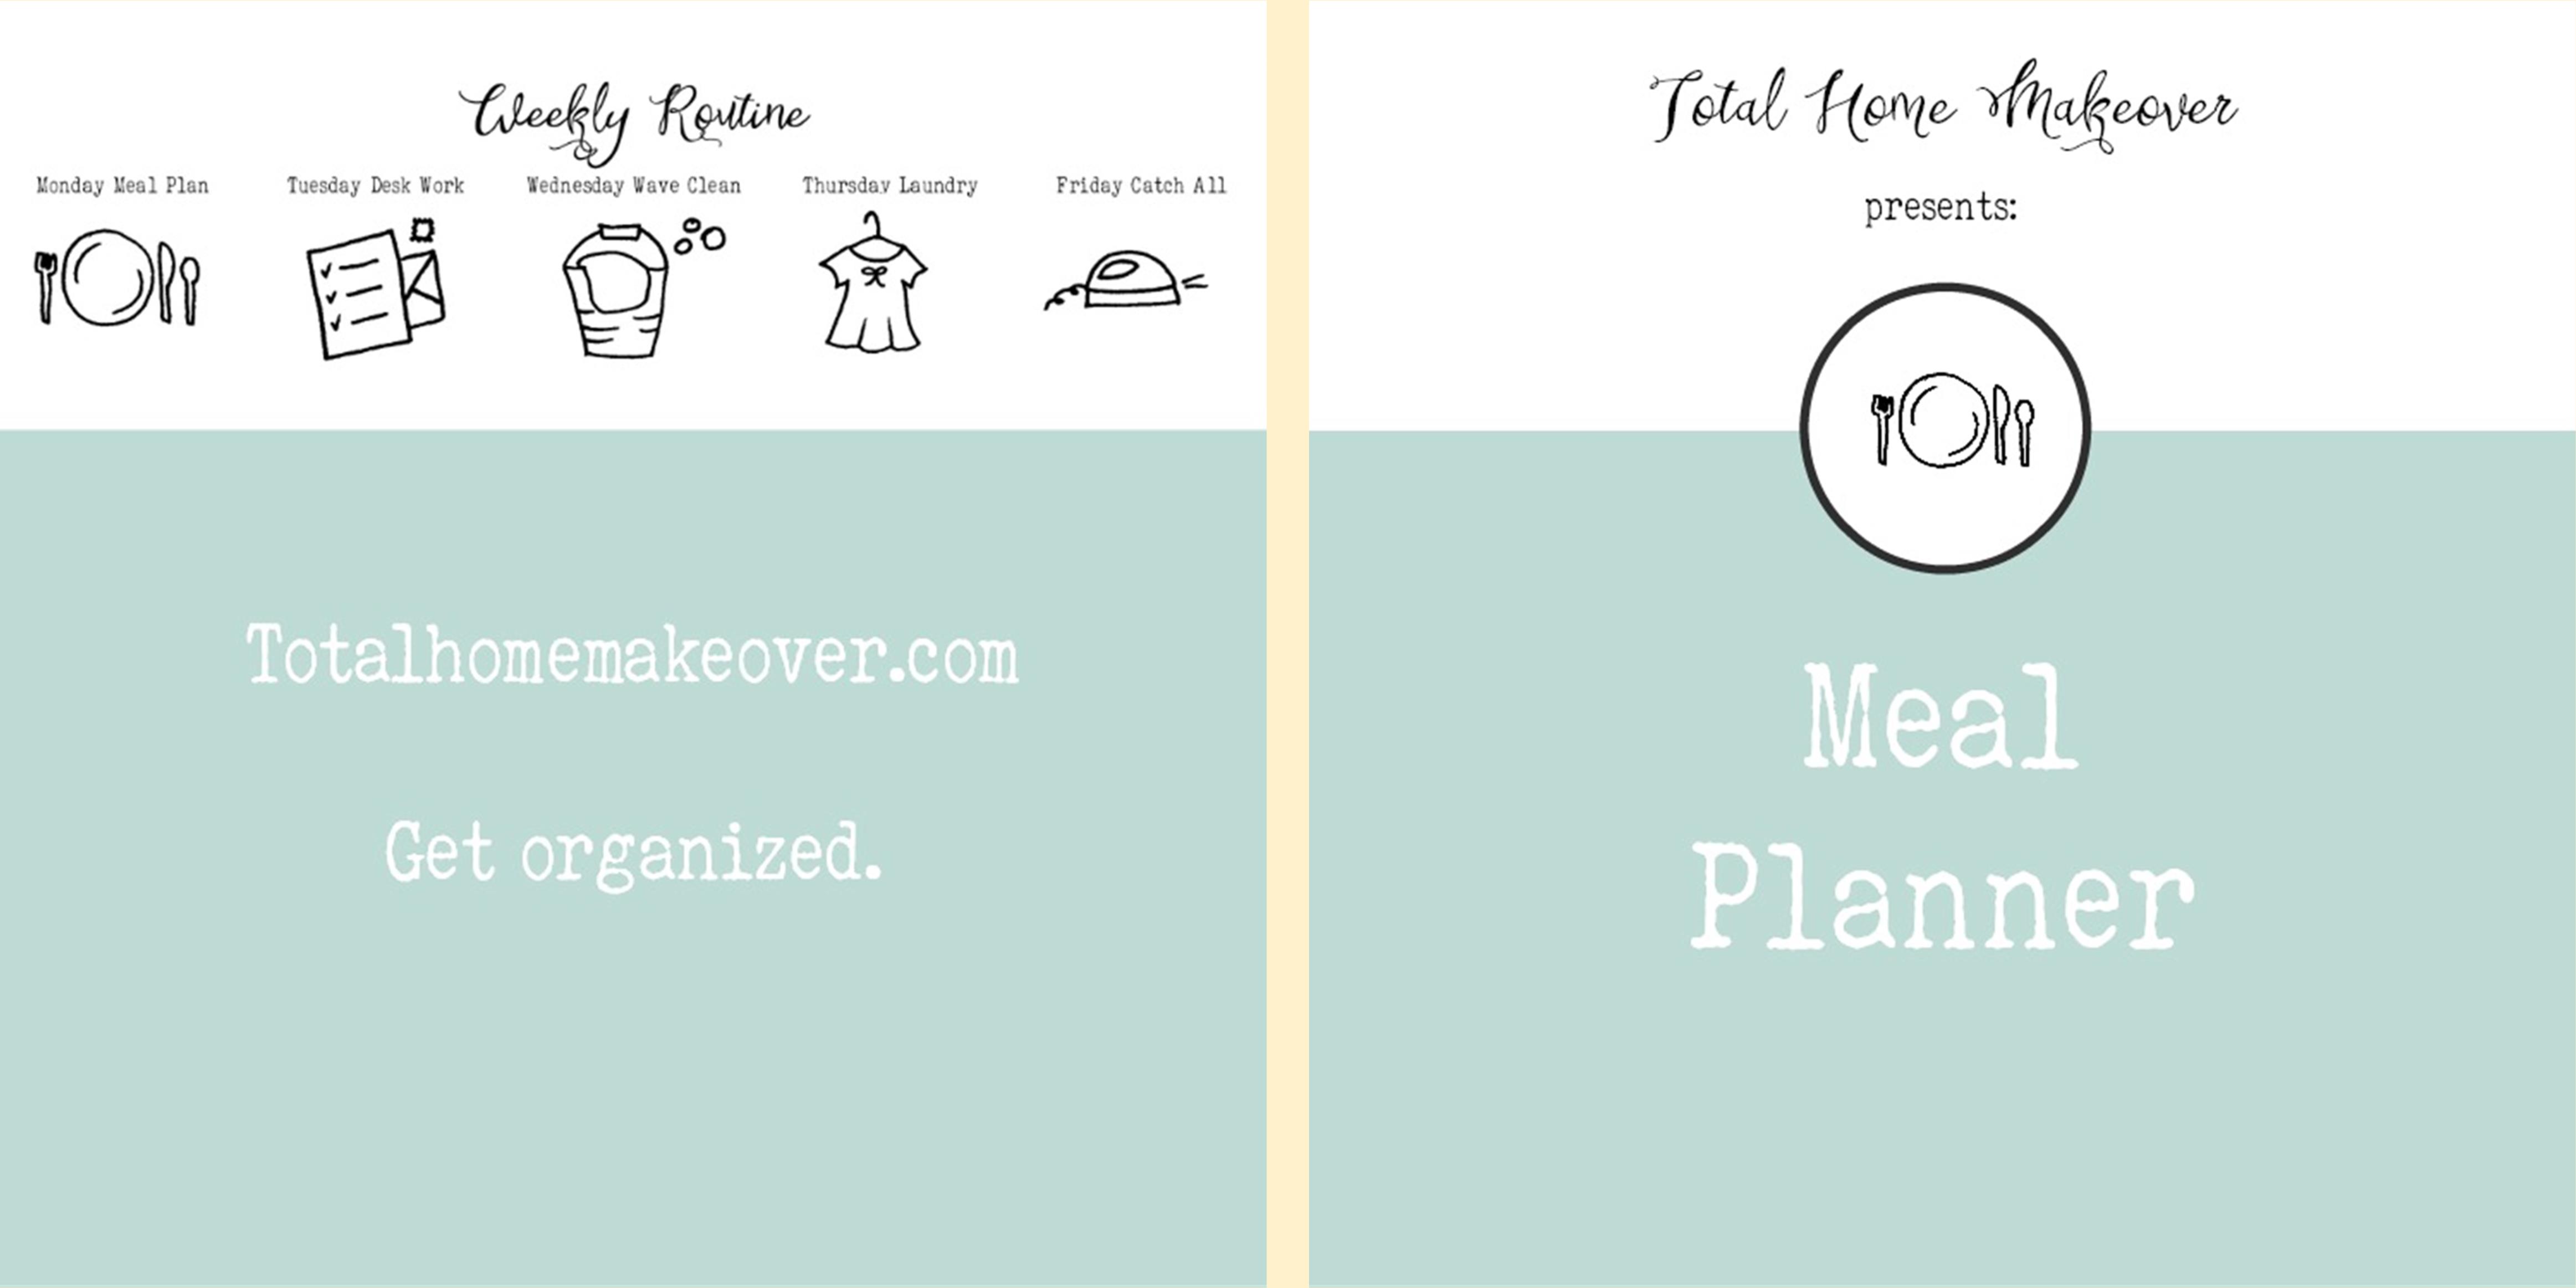 Meal Planner cover image